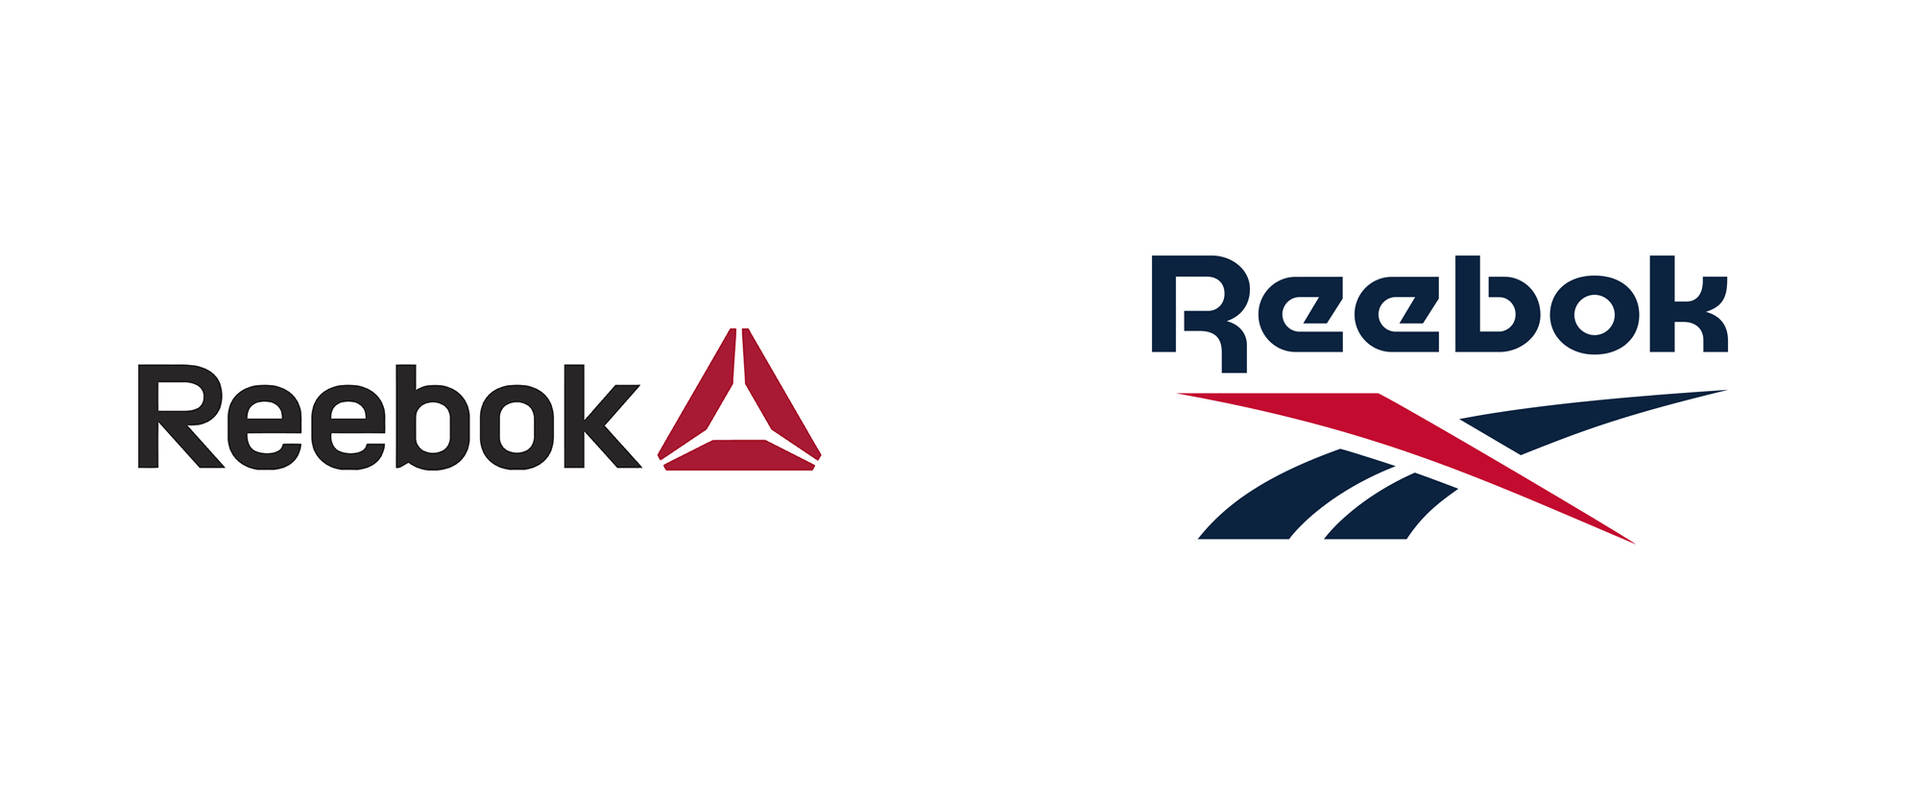 Reebok Old And New Logo